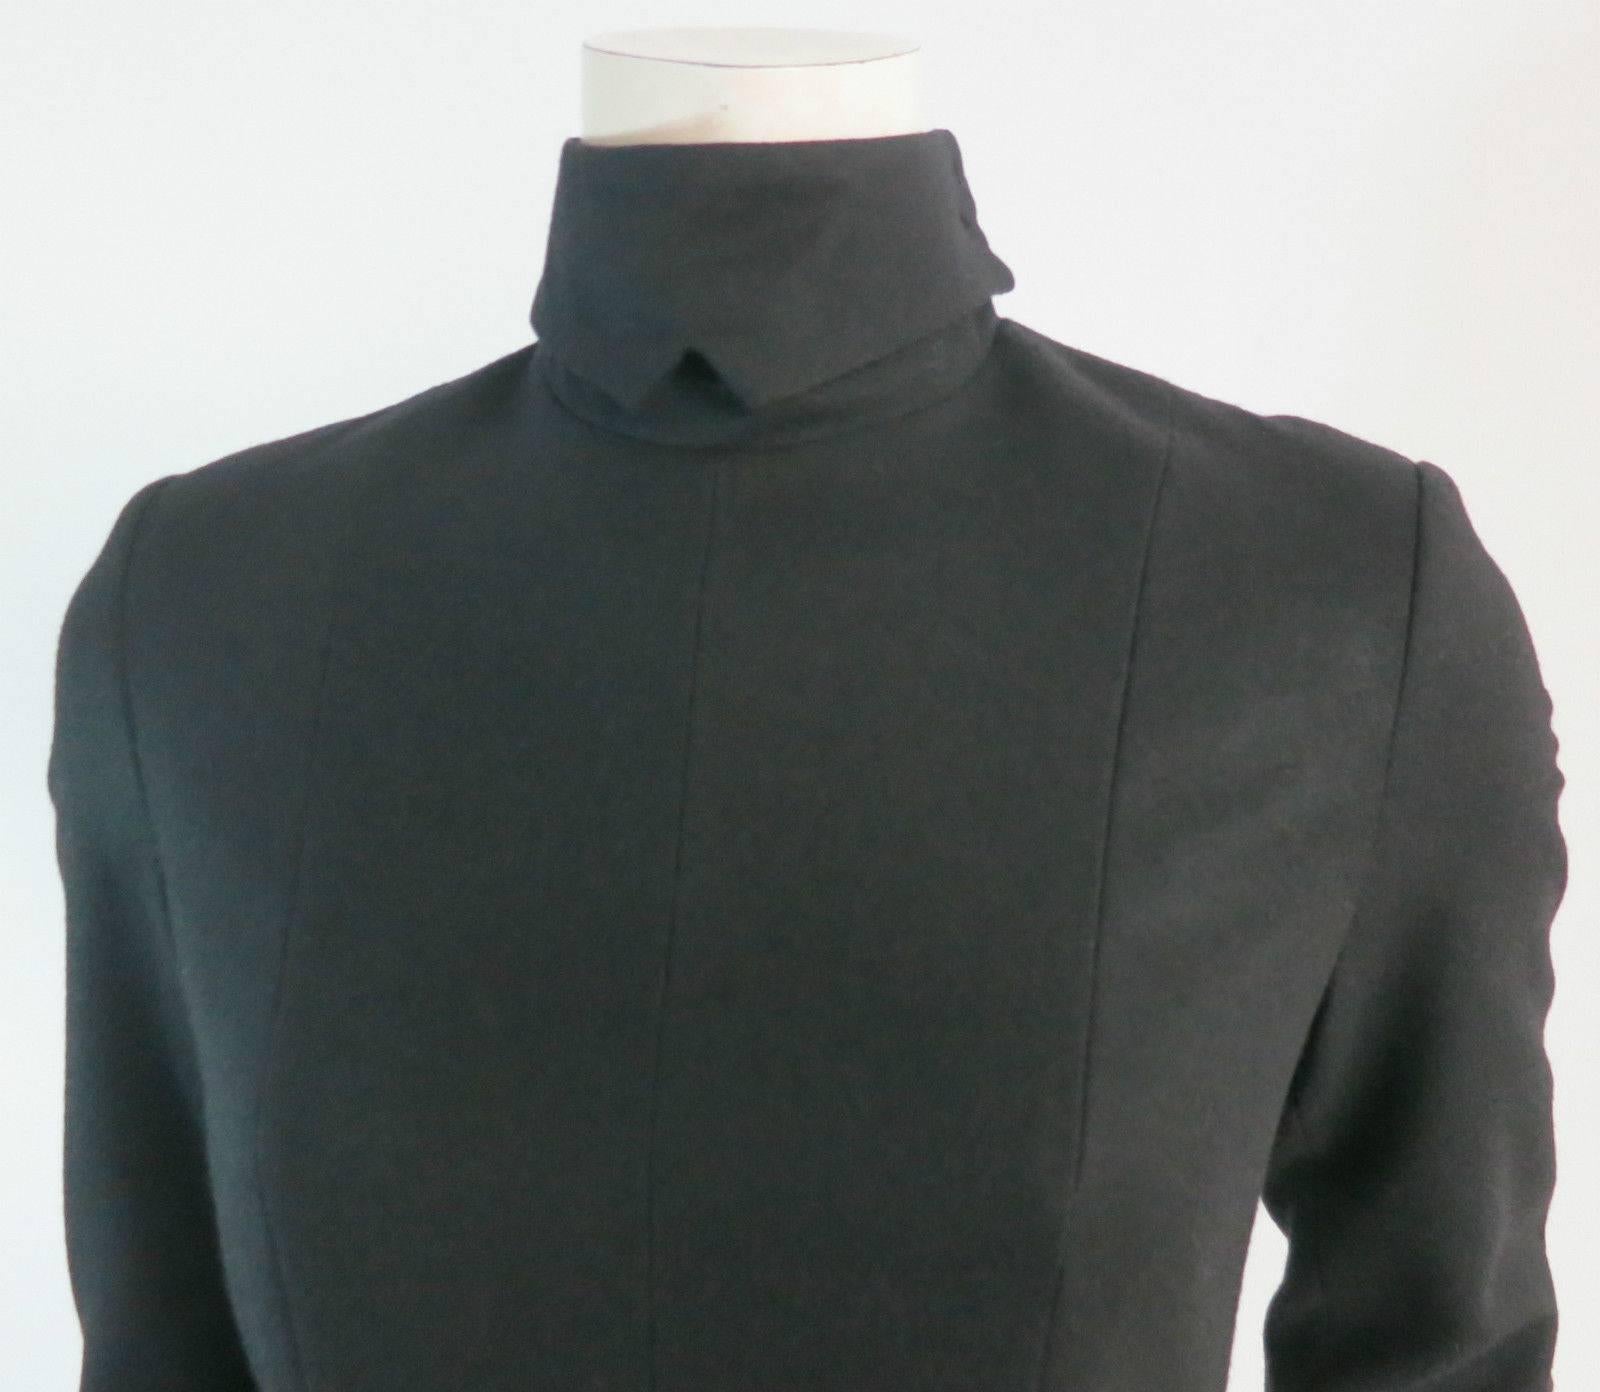 OLIVIER THEYSKENS Black wool dress In Excellent Condition For Sale In Newport Beach, CA